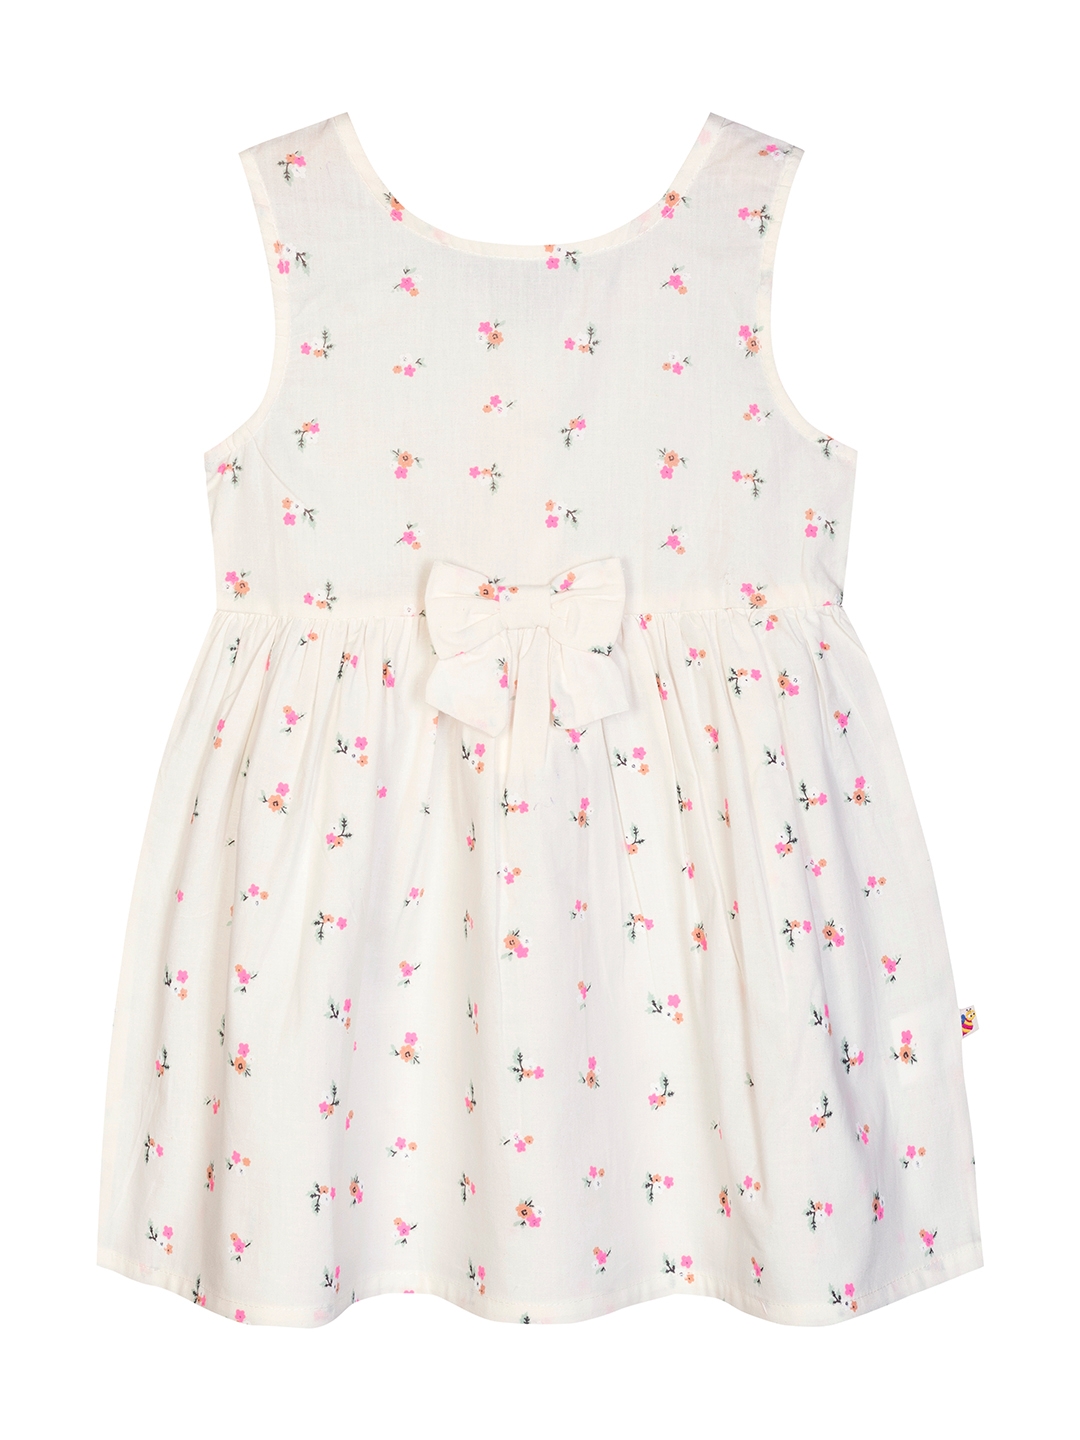 Budding Bees | Budding Bees Baby Girls White Floral Dress